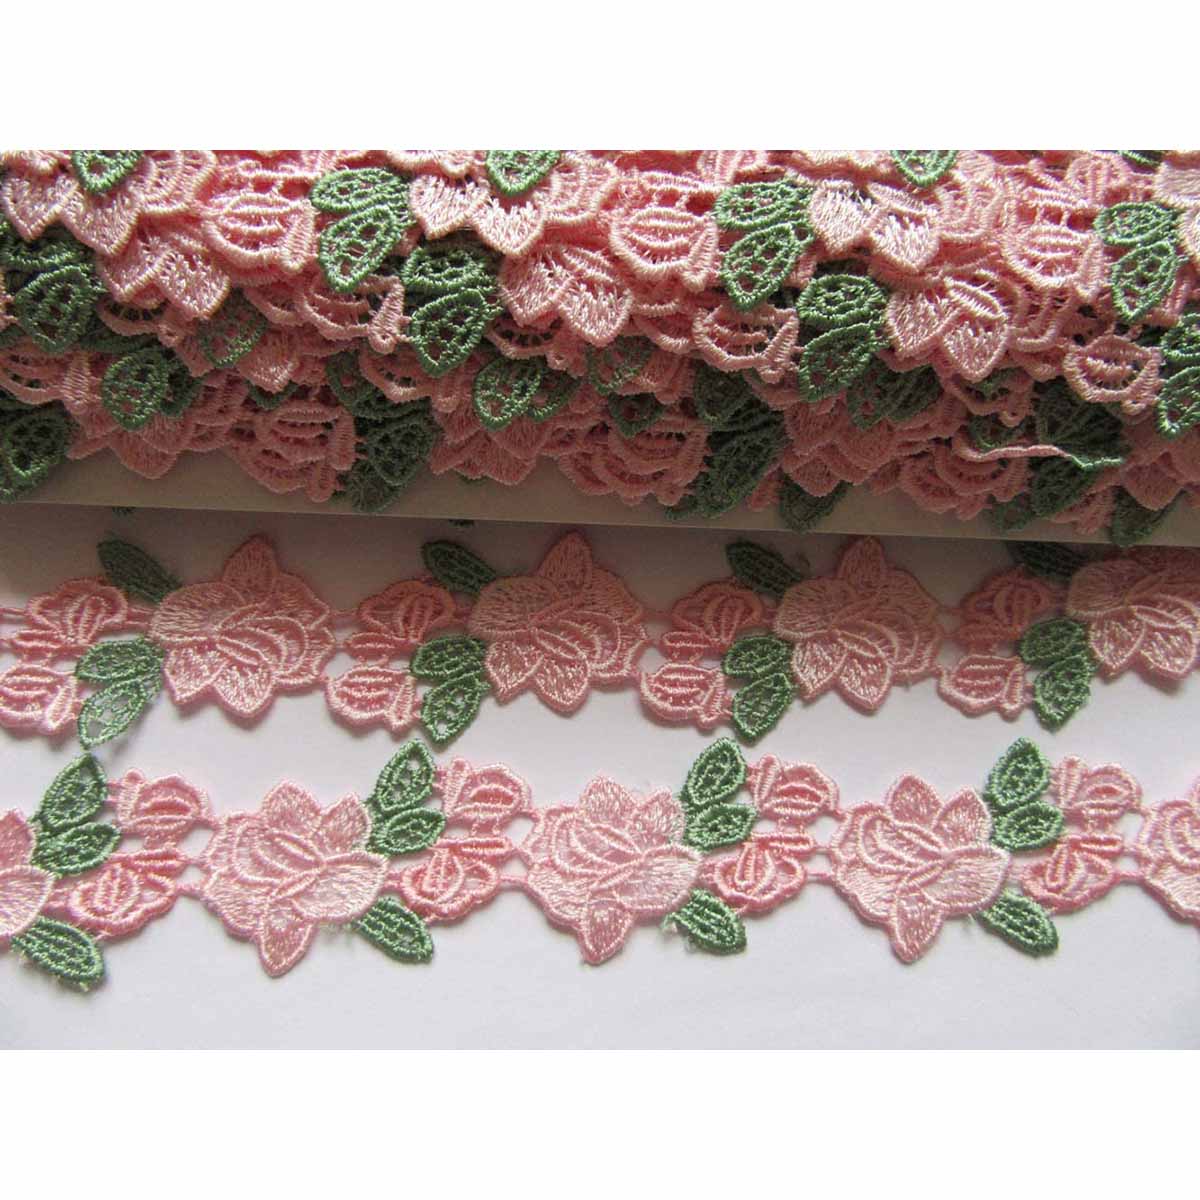 5 Yards Rose Flower Lace Edge Trim,Width:1 3/8″-Baby Pink